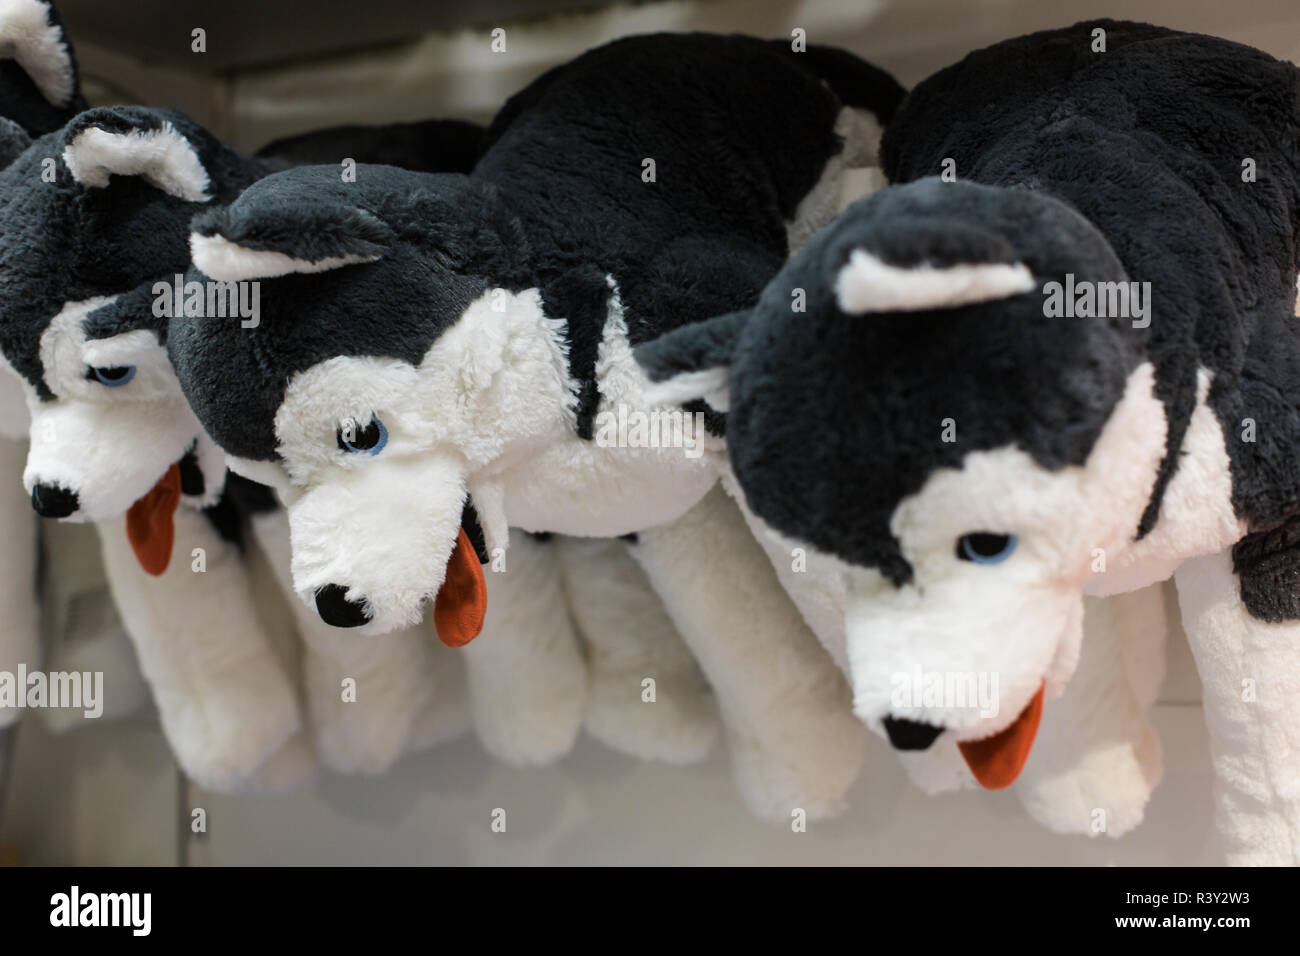 Cuddly soft toys of husky dogs from the kids shop for sale in a gift shop Stock Photo